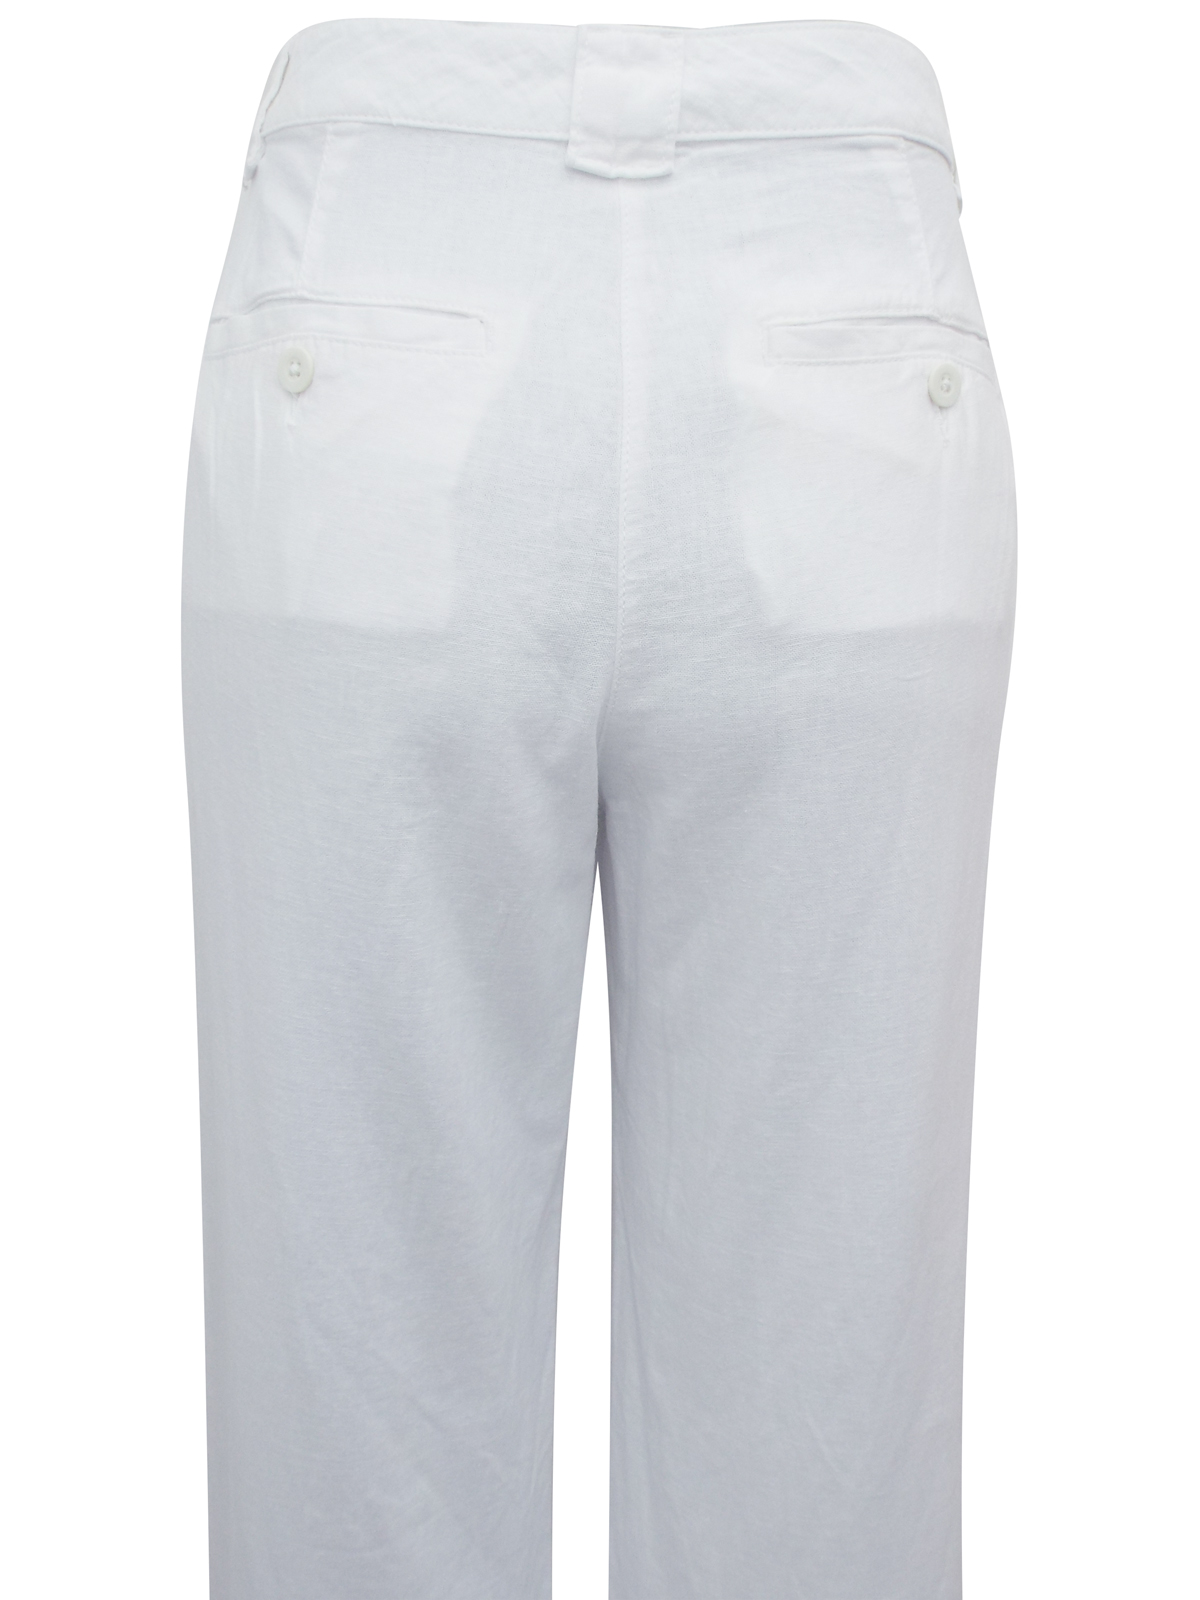 Marks and Spencer - - M&5 WHITE Linen Blend Wide Leg Trousers - Size 8 ...